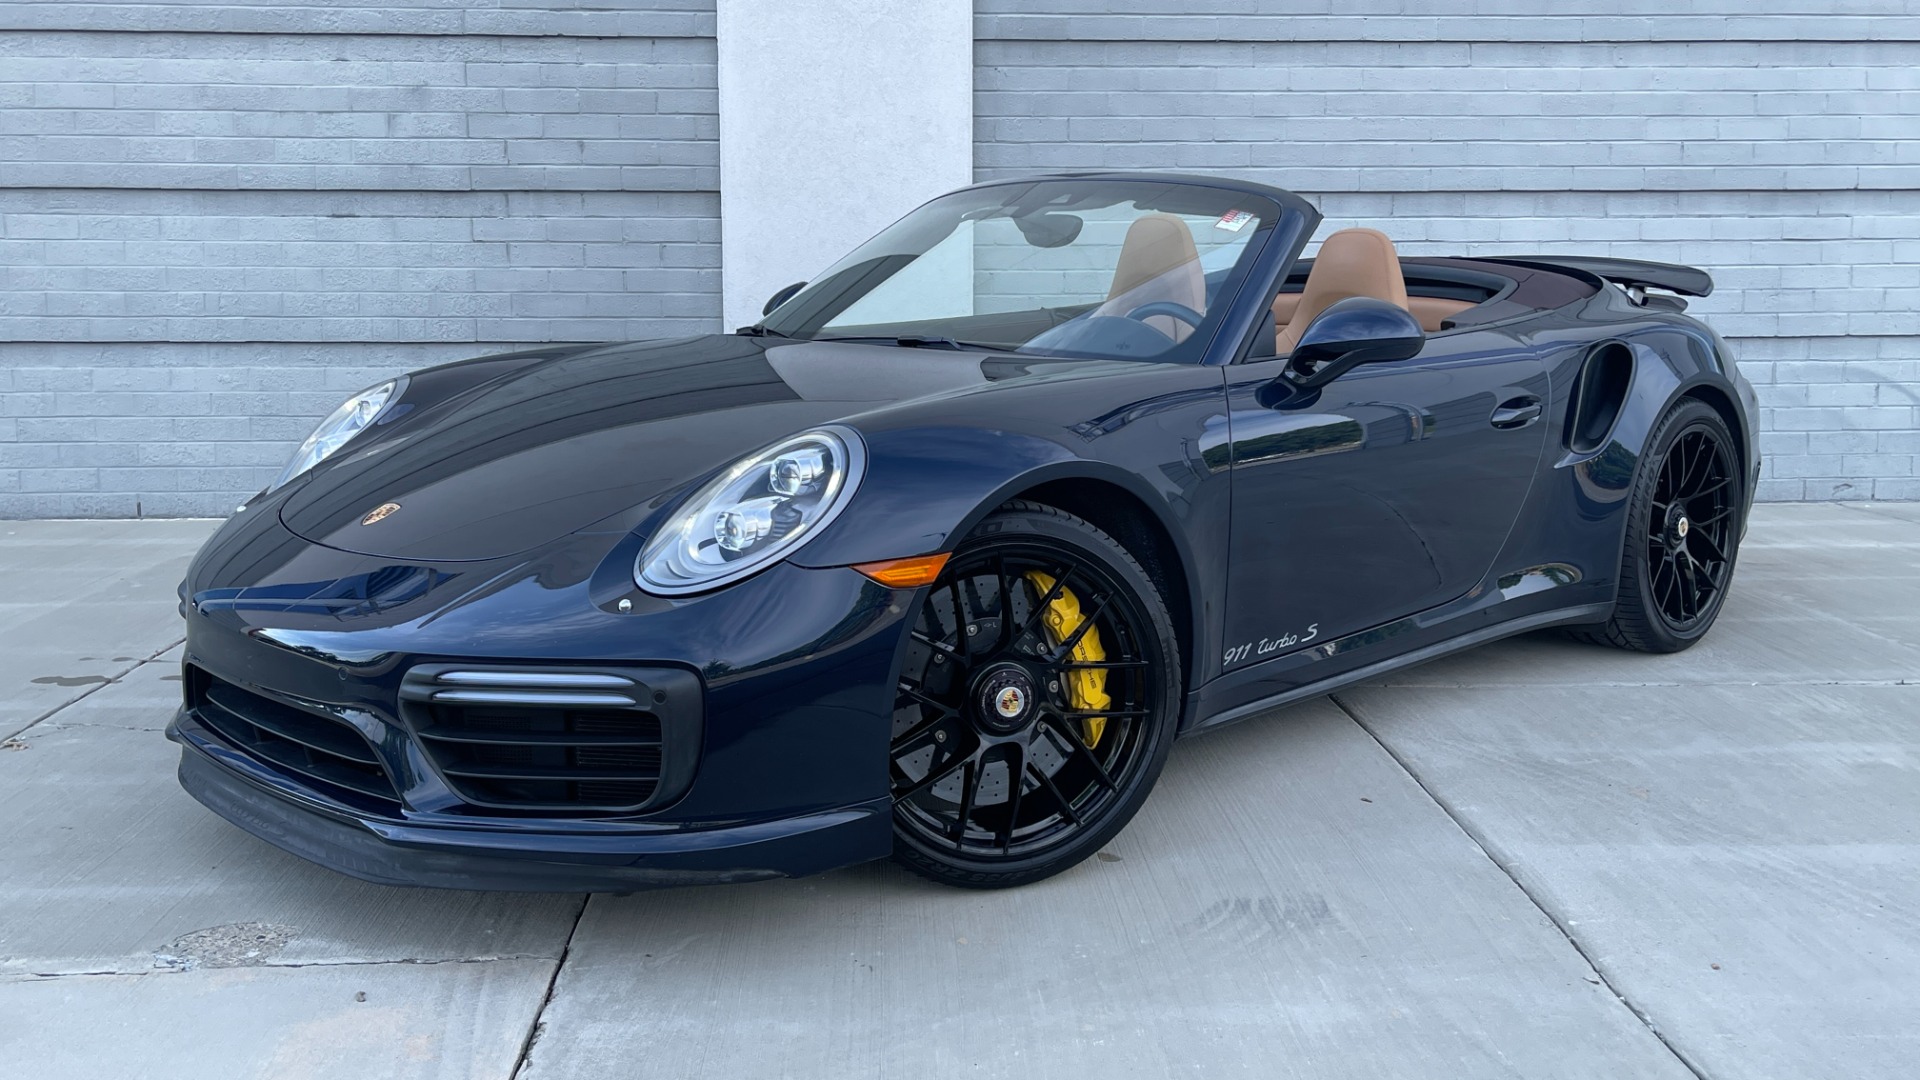 Used 2017 Porsche 911 Turbo S / CABRIOLET / FRONT LIFT / PDK / 20IN WHEELS for sale Sold at Formula Imports in Charlotte NC 28227 4